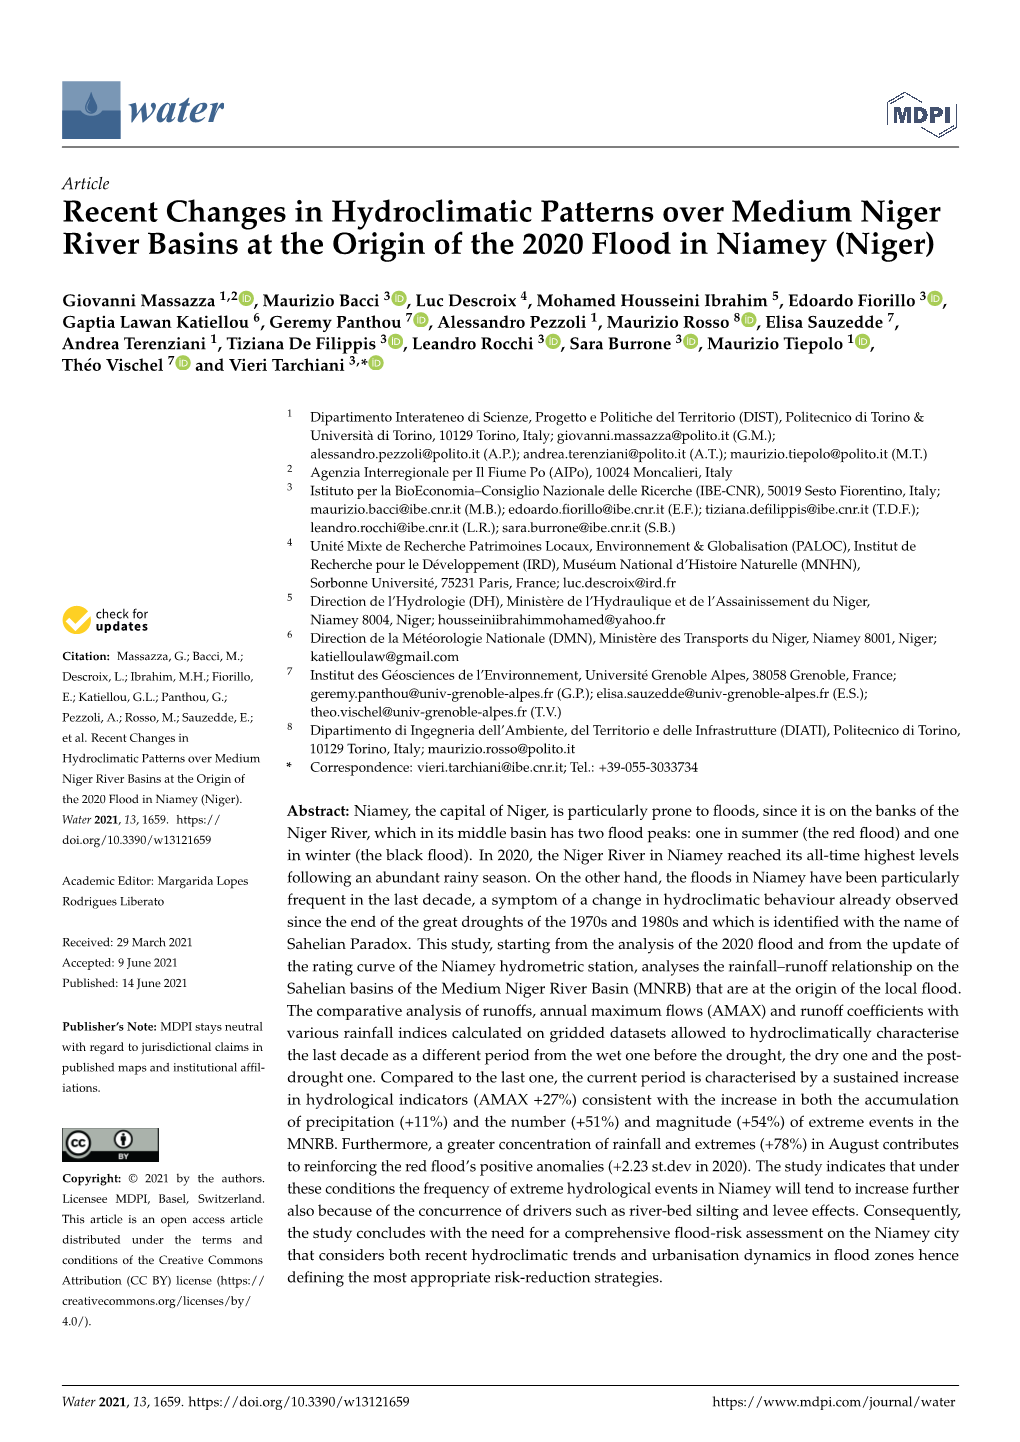 Recent Changes in Hydroclimatic Patterns Over Medium Niger River Basins at the Origin of the 2020 Flood in Niamey (Niger)